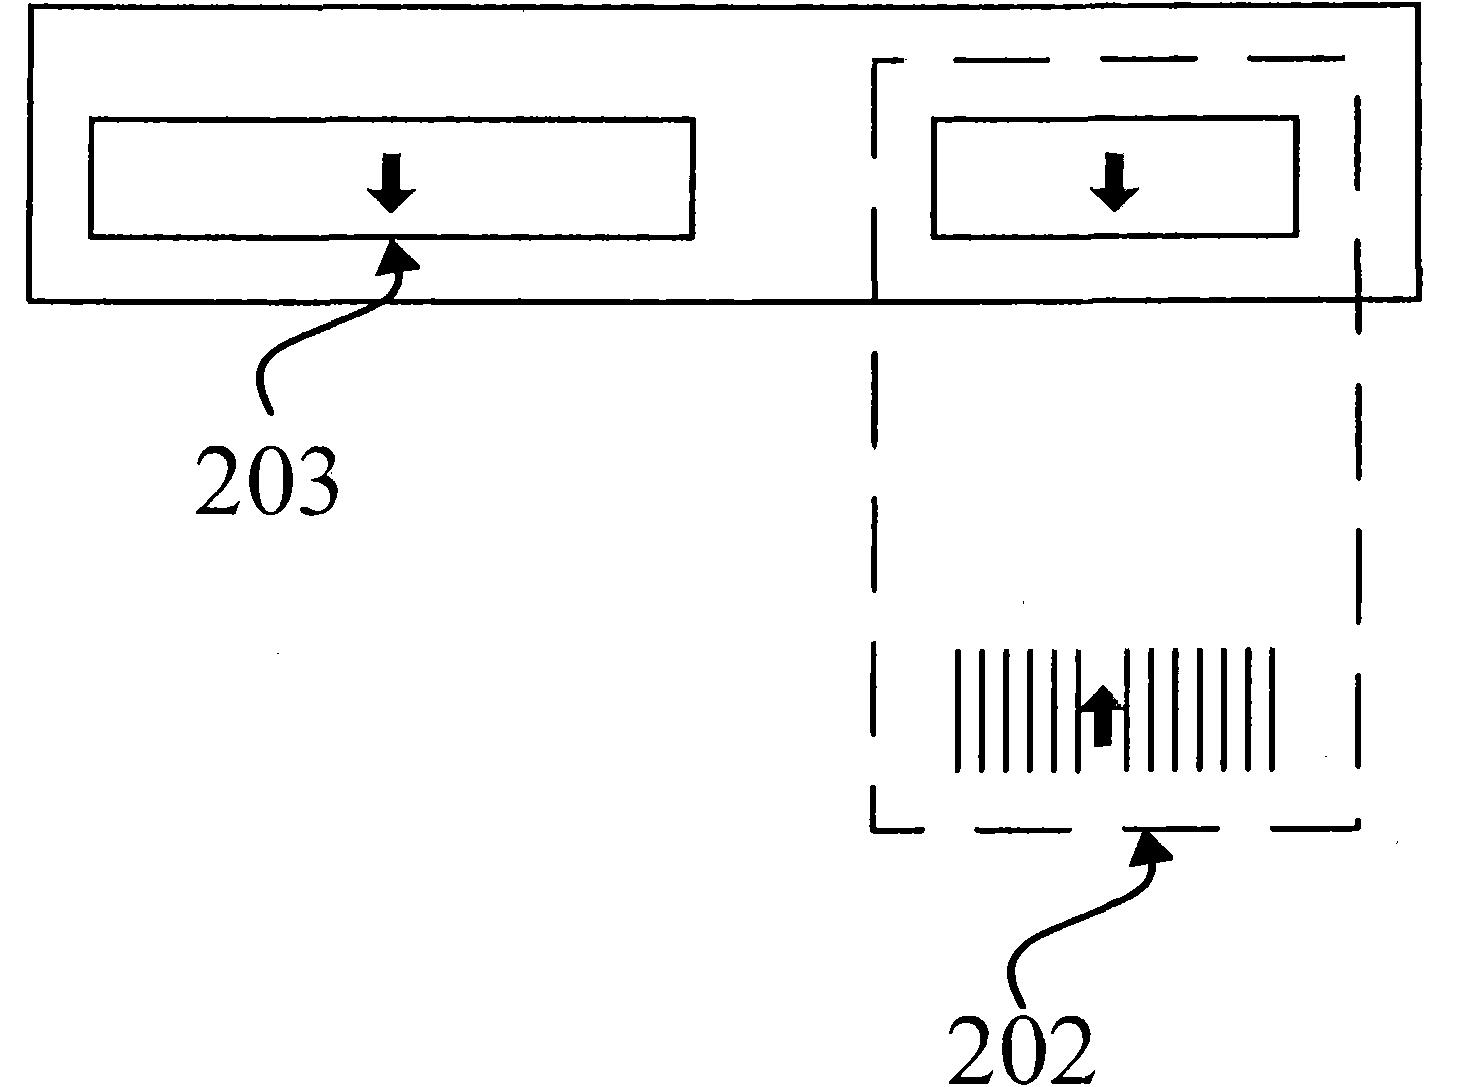 Carrier aggregation method and dynamic spectrum allocation method